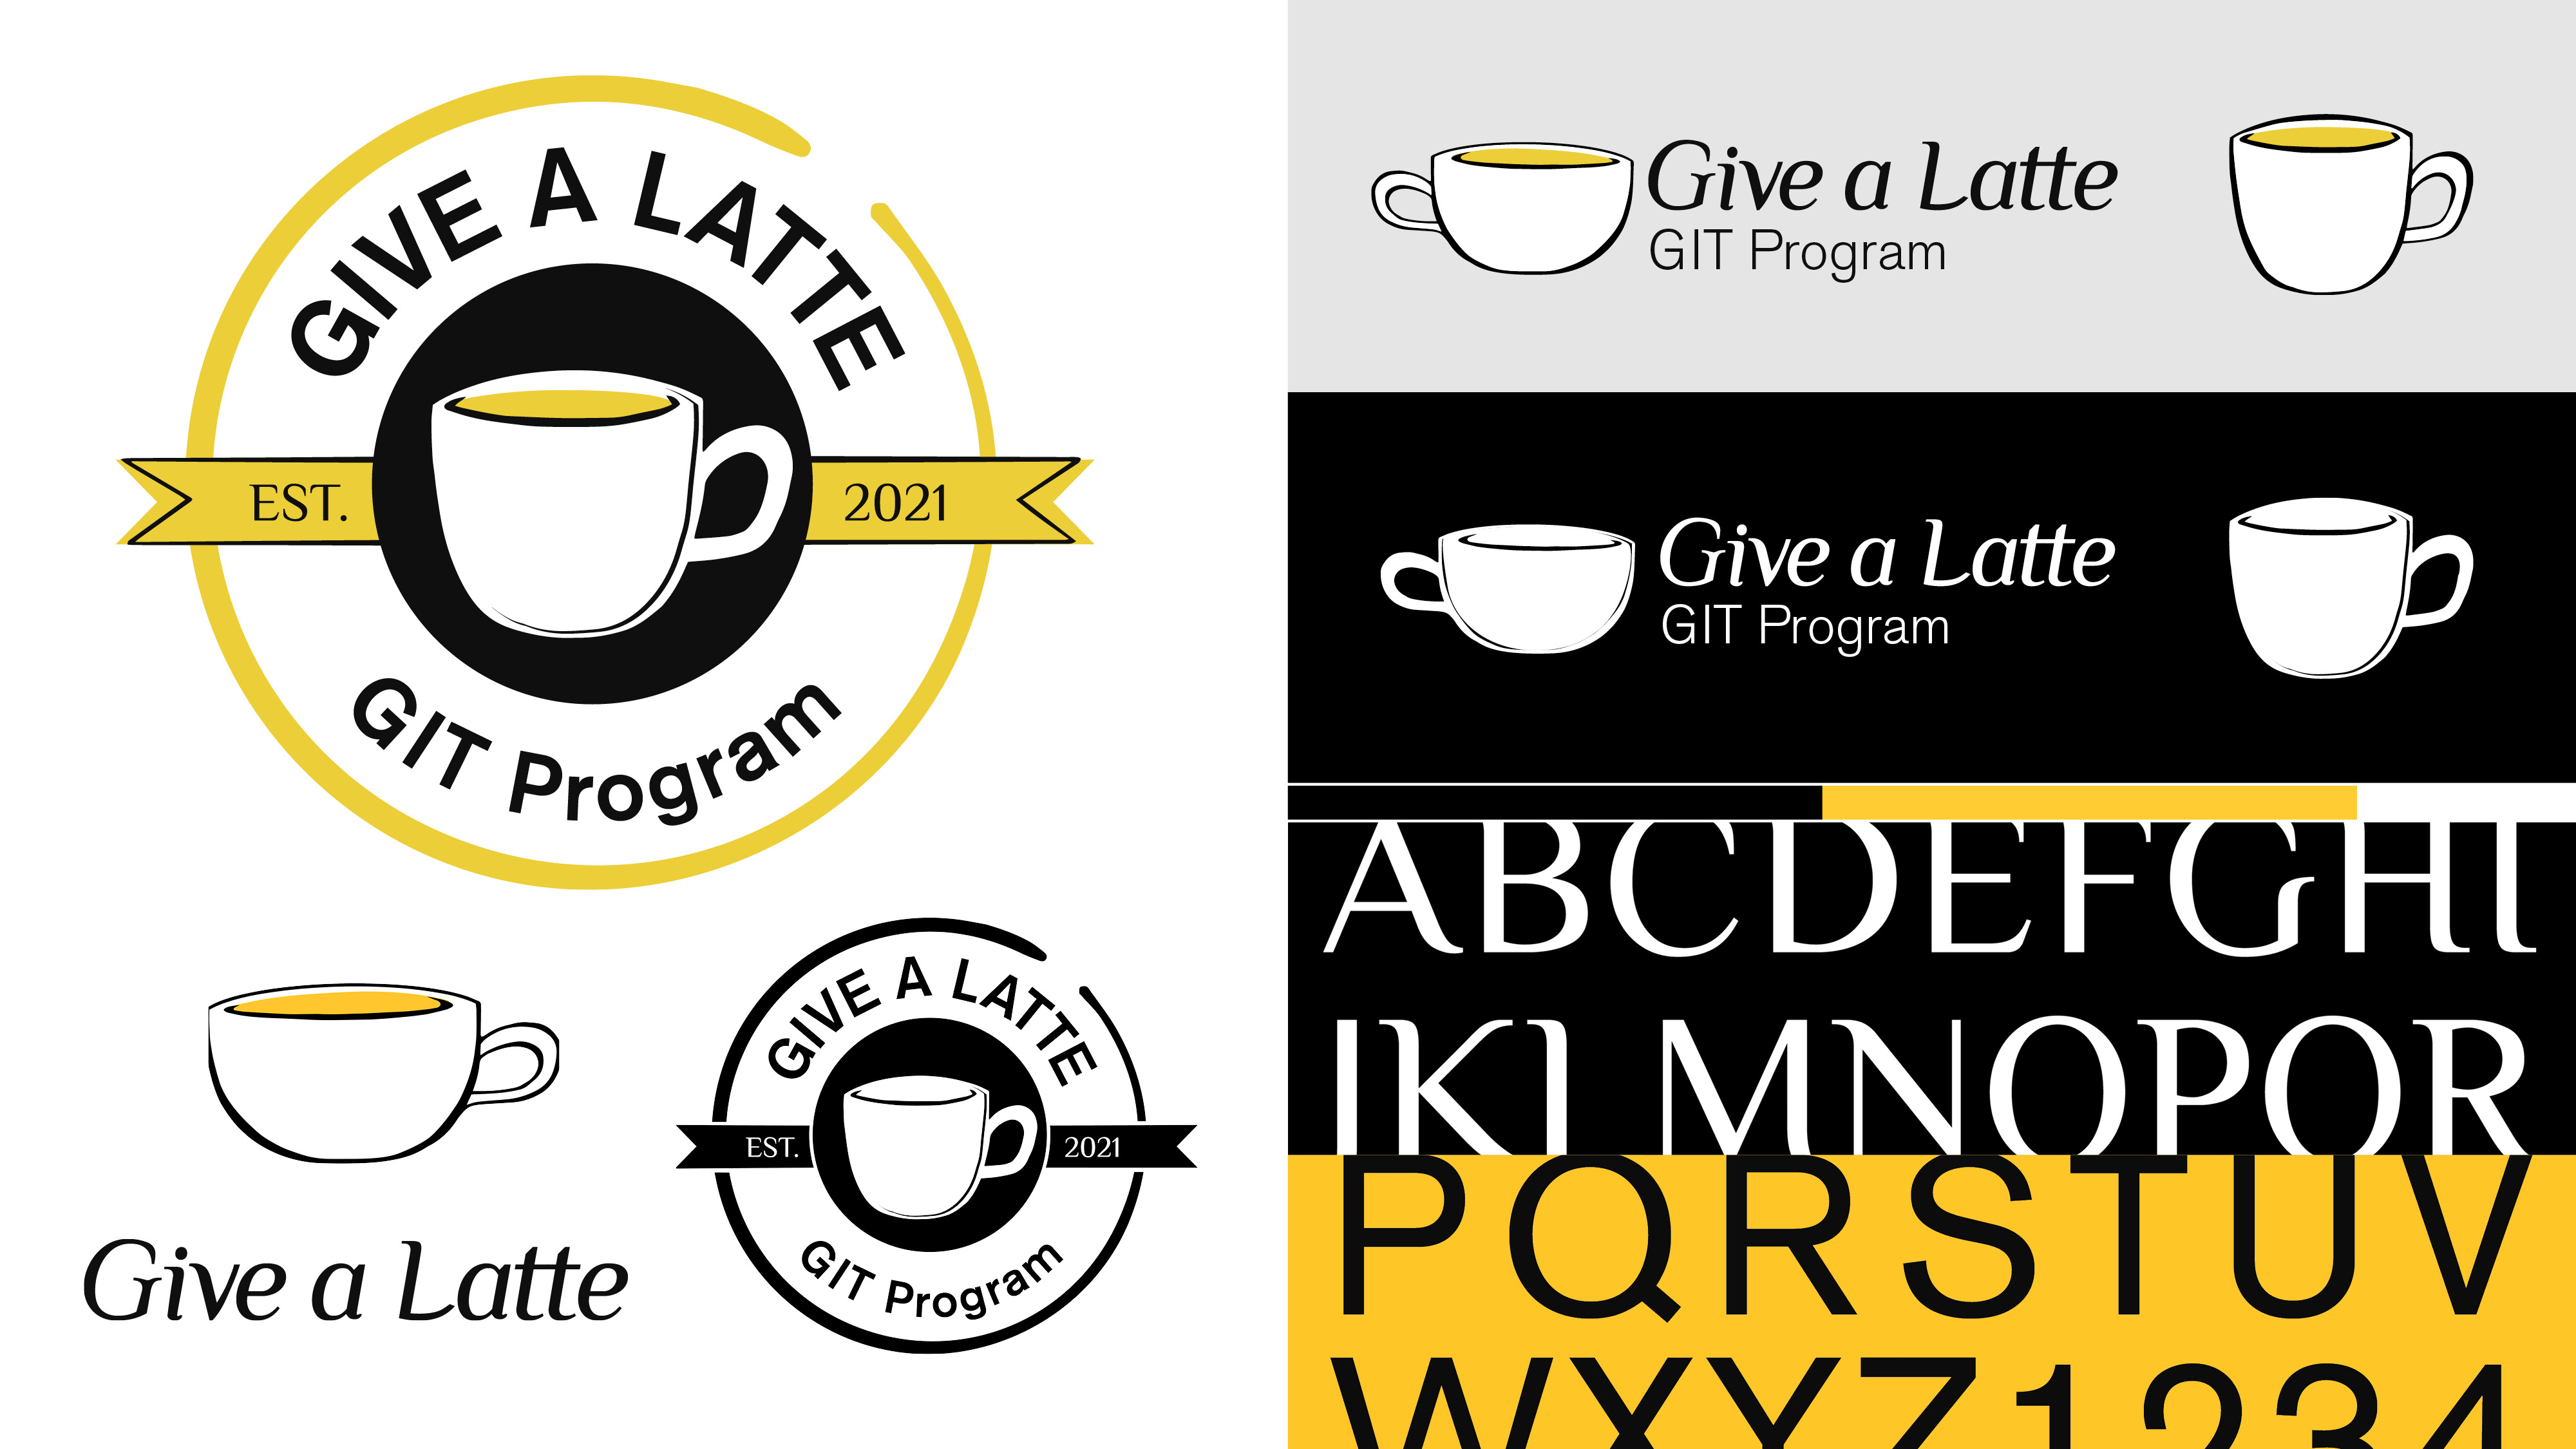 featured image two:Give A Latte Campaign Illustrations & Web Design